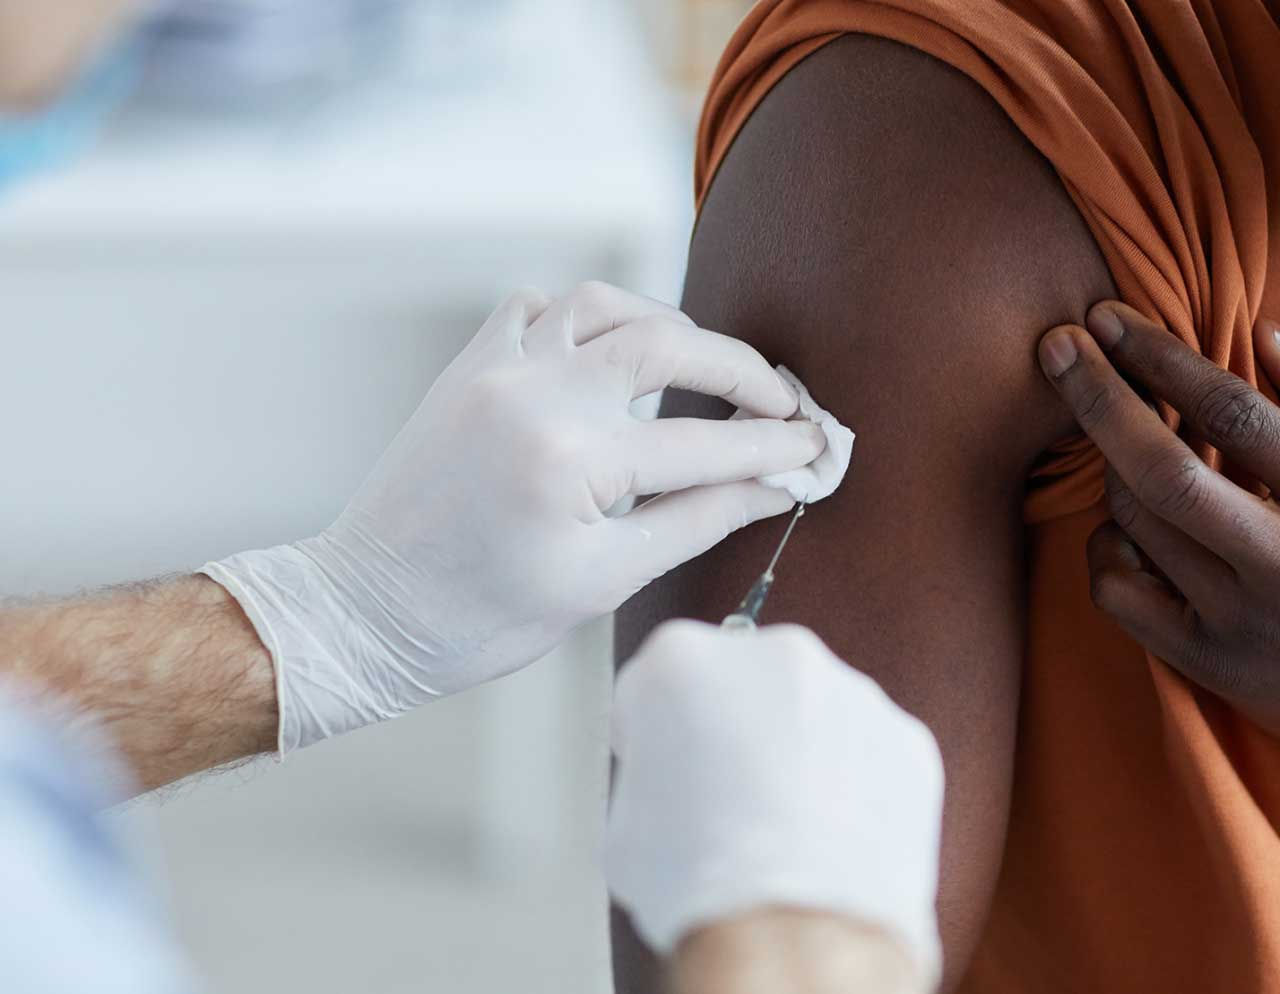 Man receiving a flu shot in his arm from clinician.